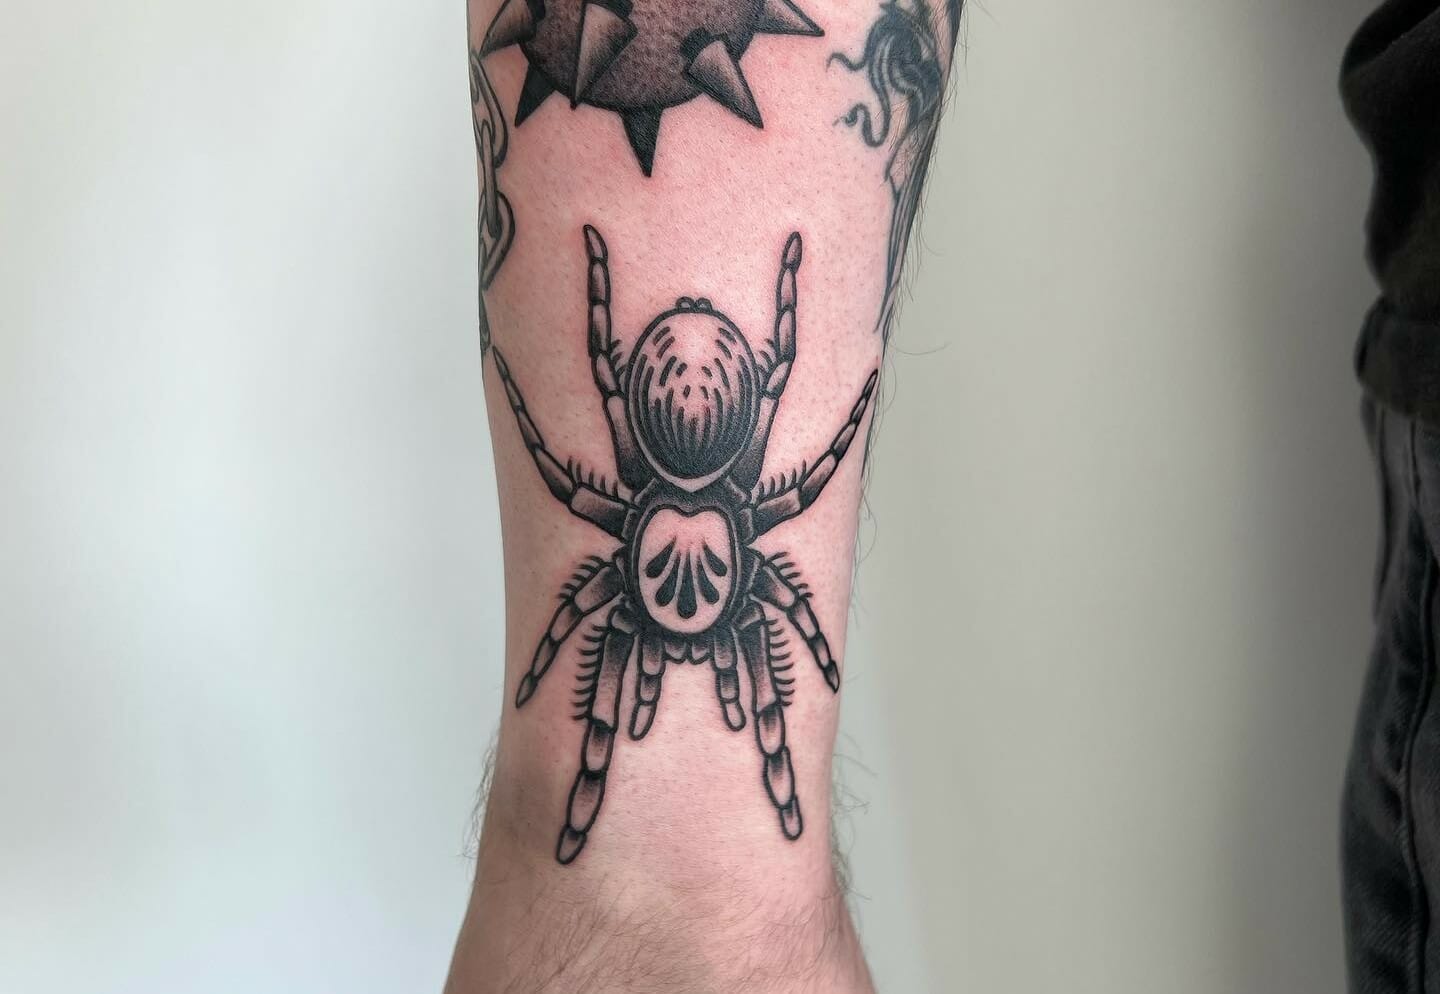 101 Best Traditional Spider Tattoo Ideas That Will Blow Your Mind! - Outsons